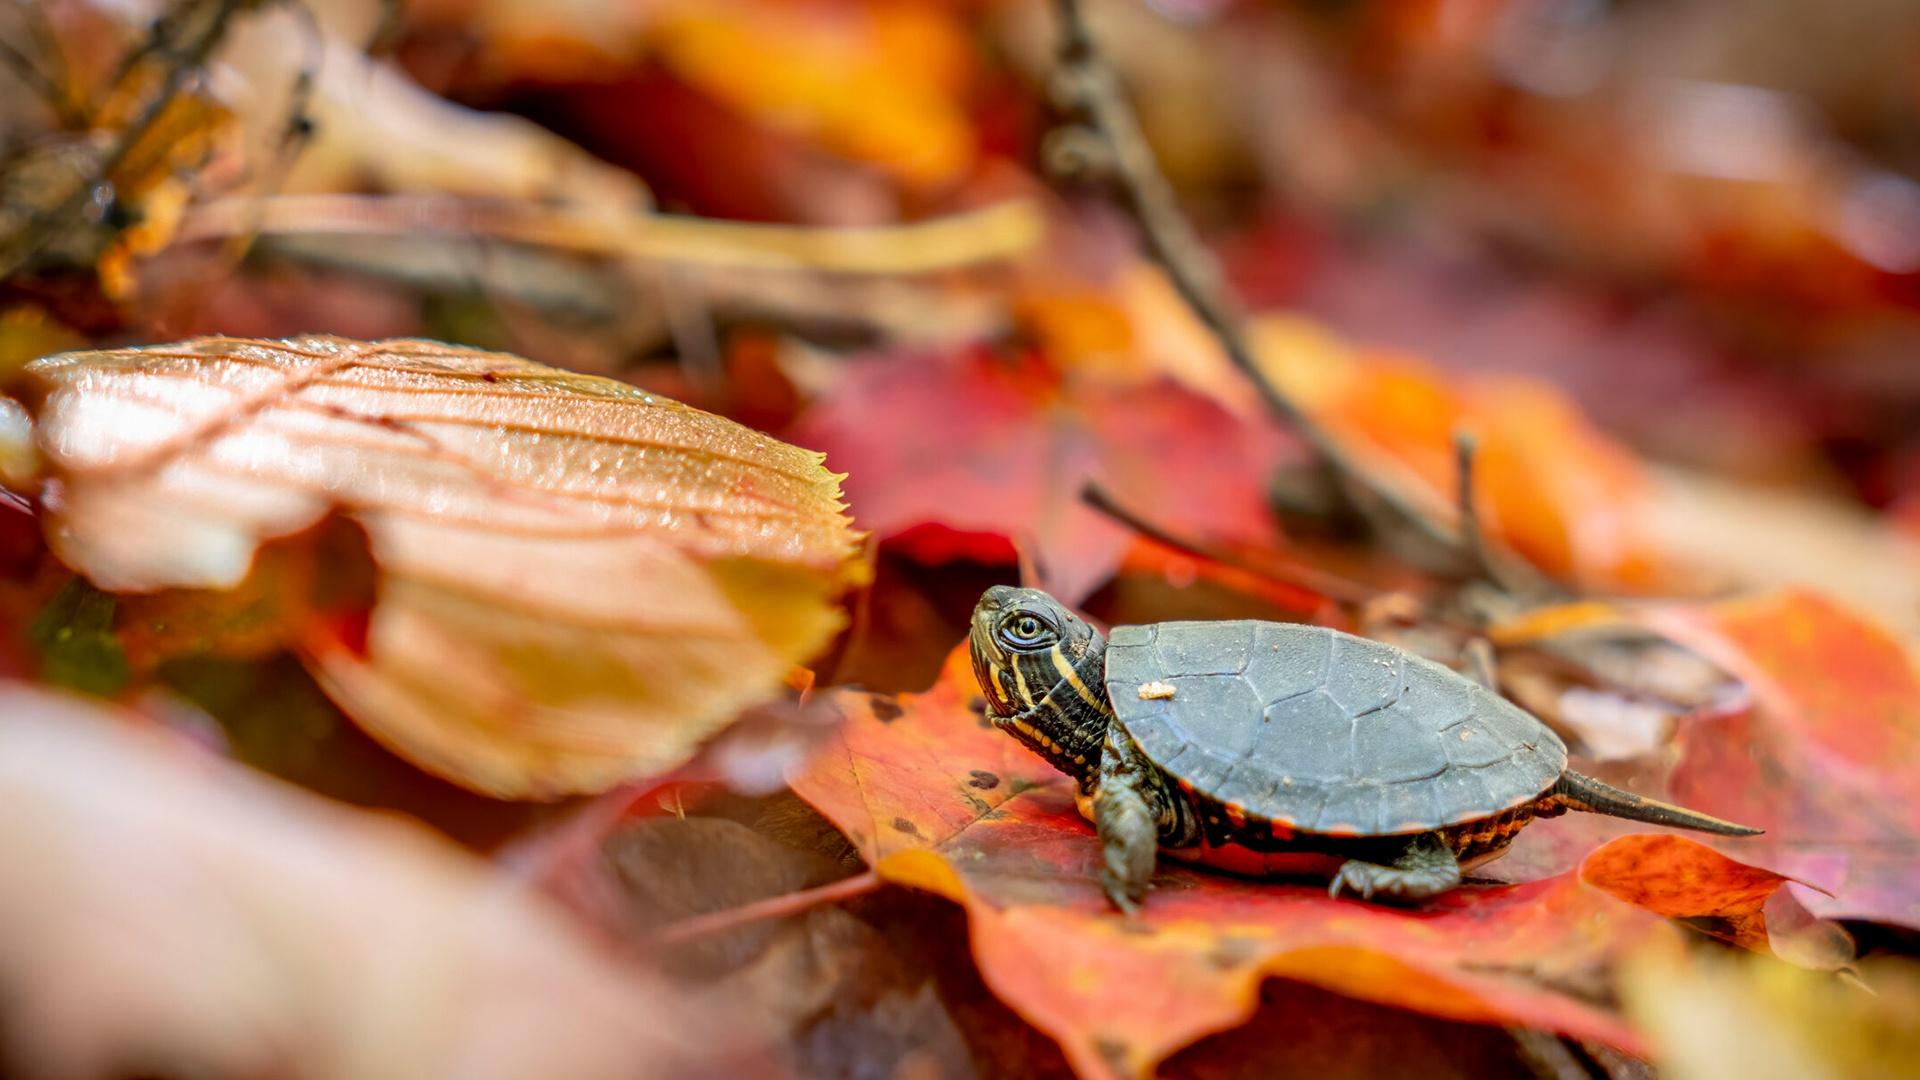 A painted turtle walking across some moss at Algonquin Provincial Park in Canada